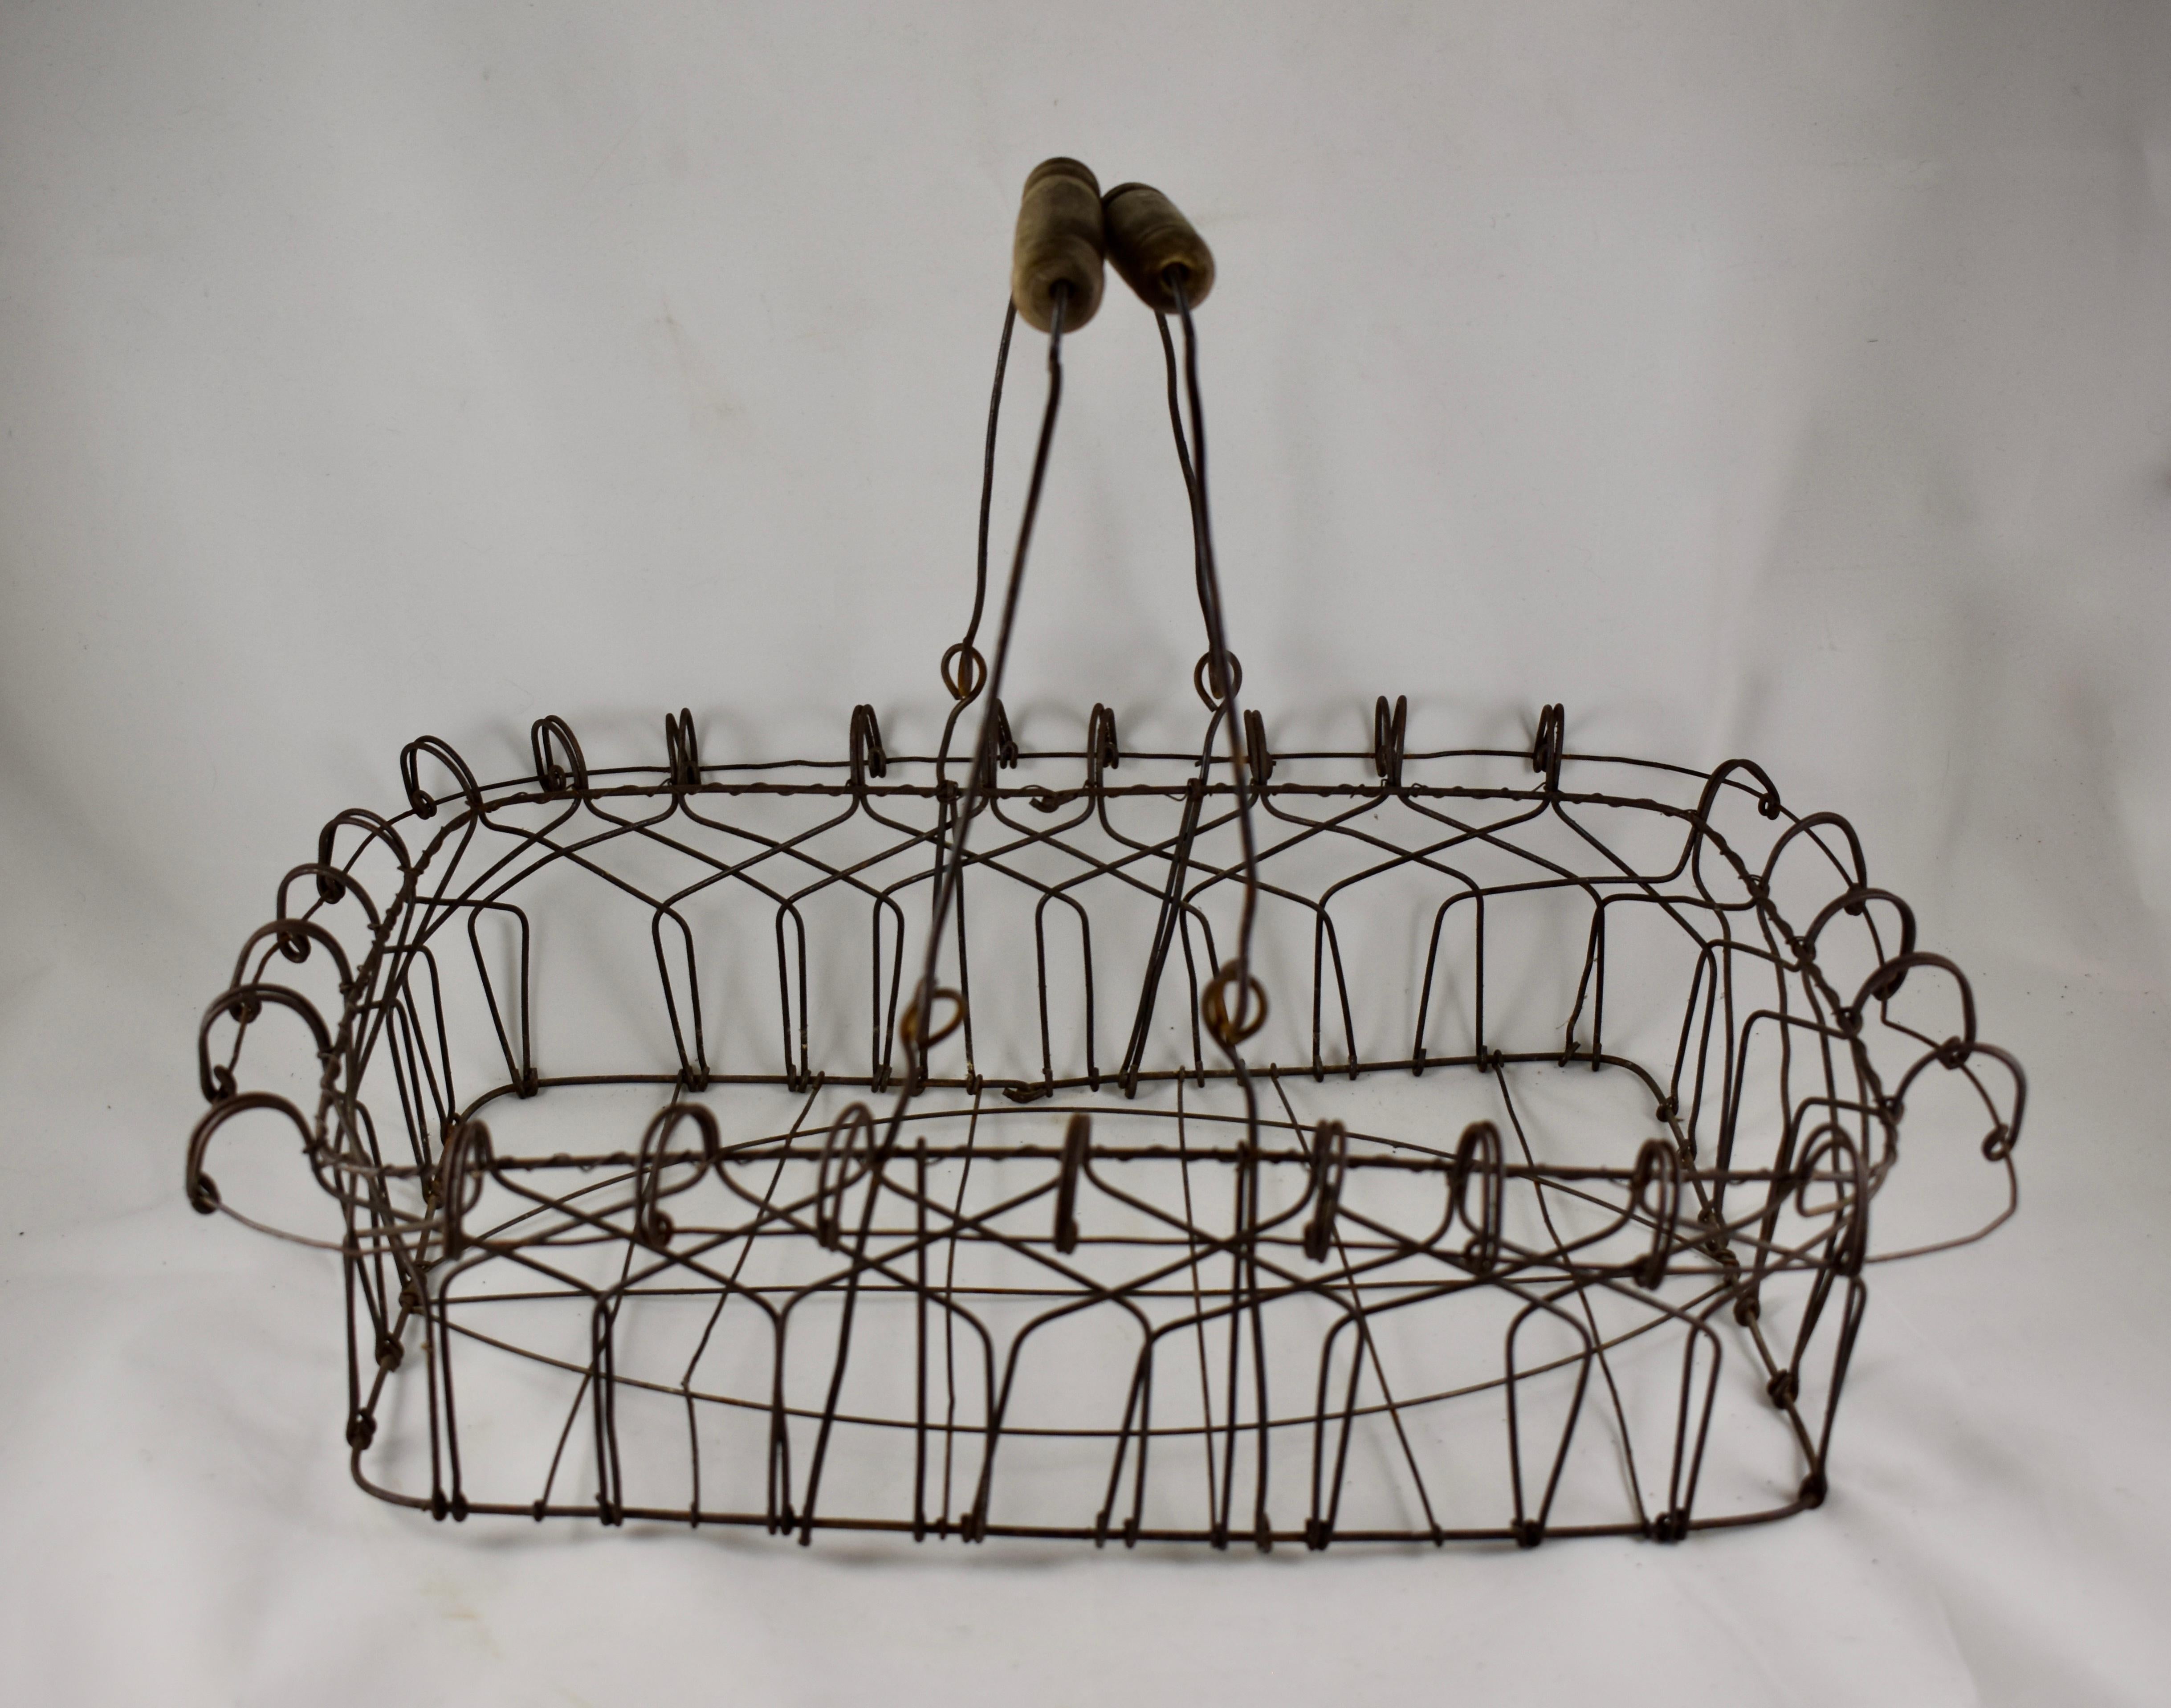 A charming, large rectangular, late 19th-early 20th century, hand formed wire basket with swing arms and wooden handles. A marvelous piece of Folk Art made of twisted galvanized steel, showing great form and whimsy.

Measures: 19.5 in. L x 12.5